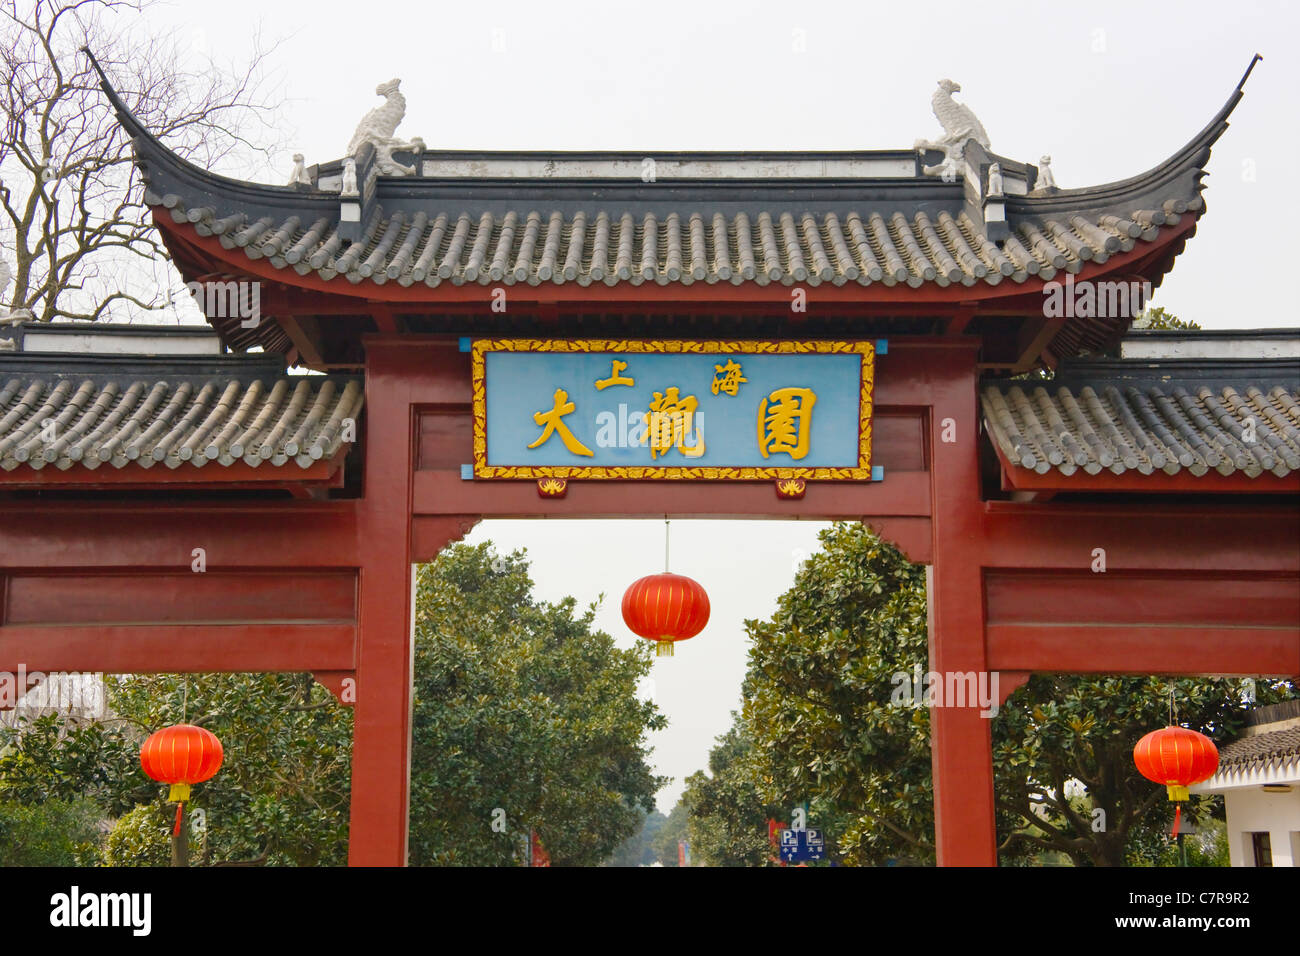 Traditional archway, entrance to Daguanyuan Garden, Shanghai, China Stock Photo